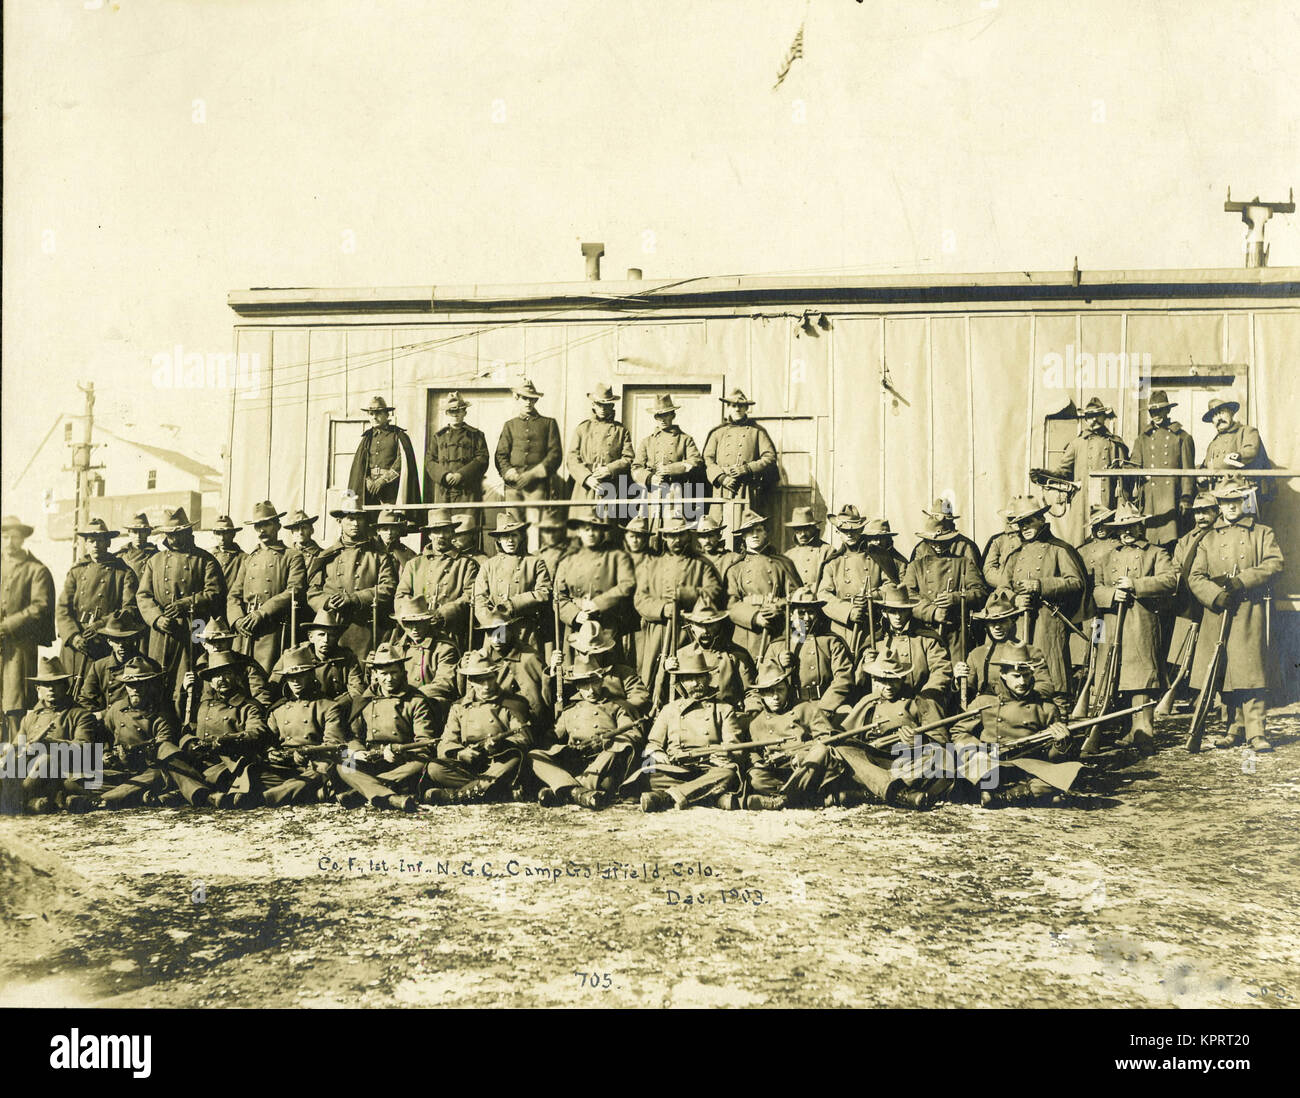 Federal Troops Brought In To Put Down Strikes In Goldfield, Company 'F' 1St Infantry National Guard Of Colorado Stock Photo